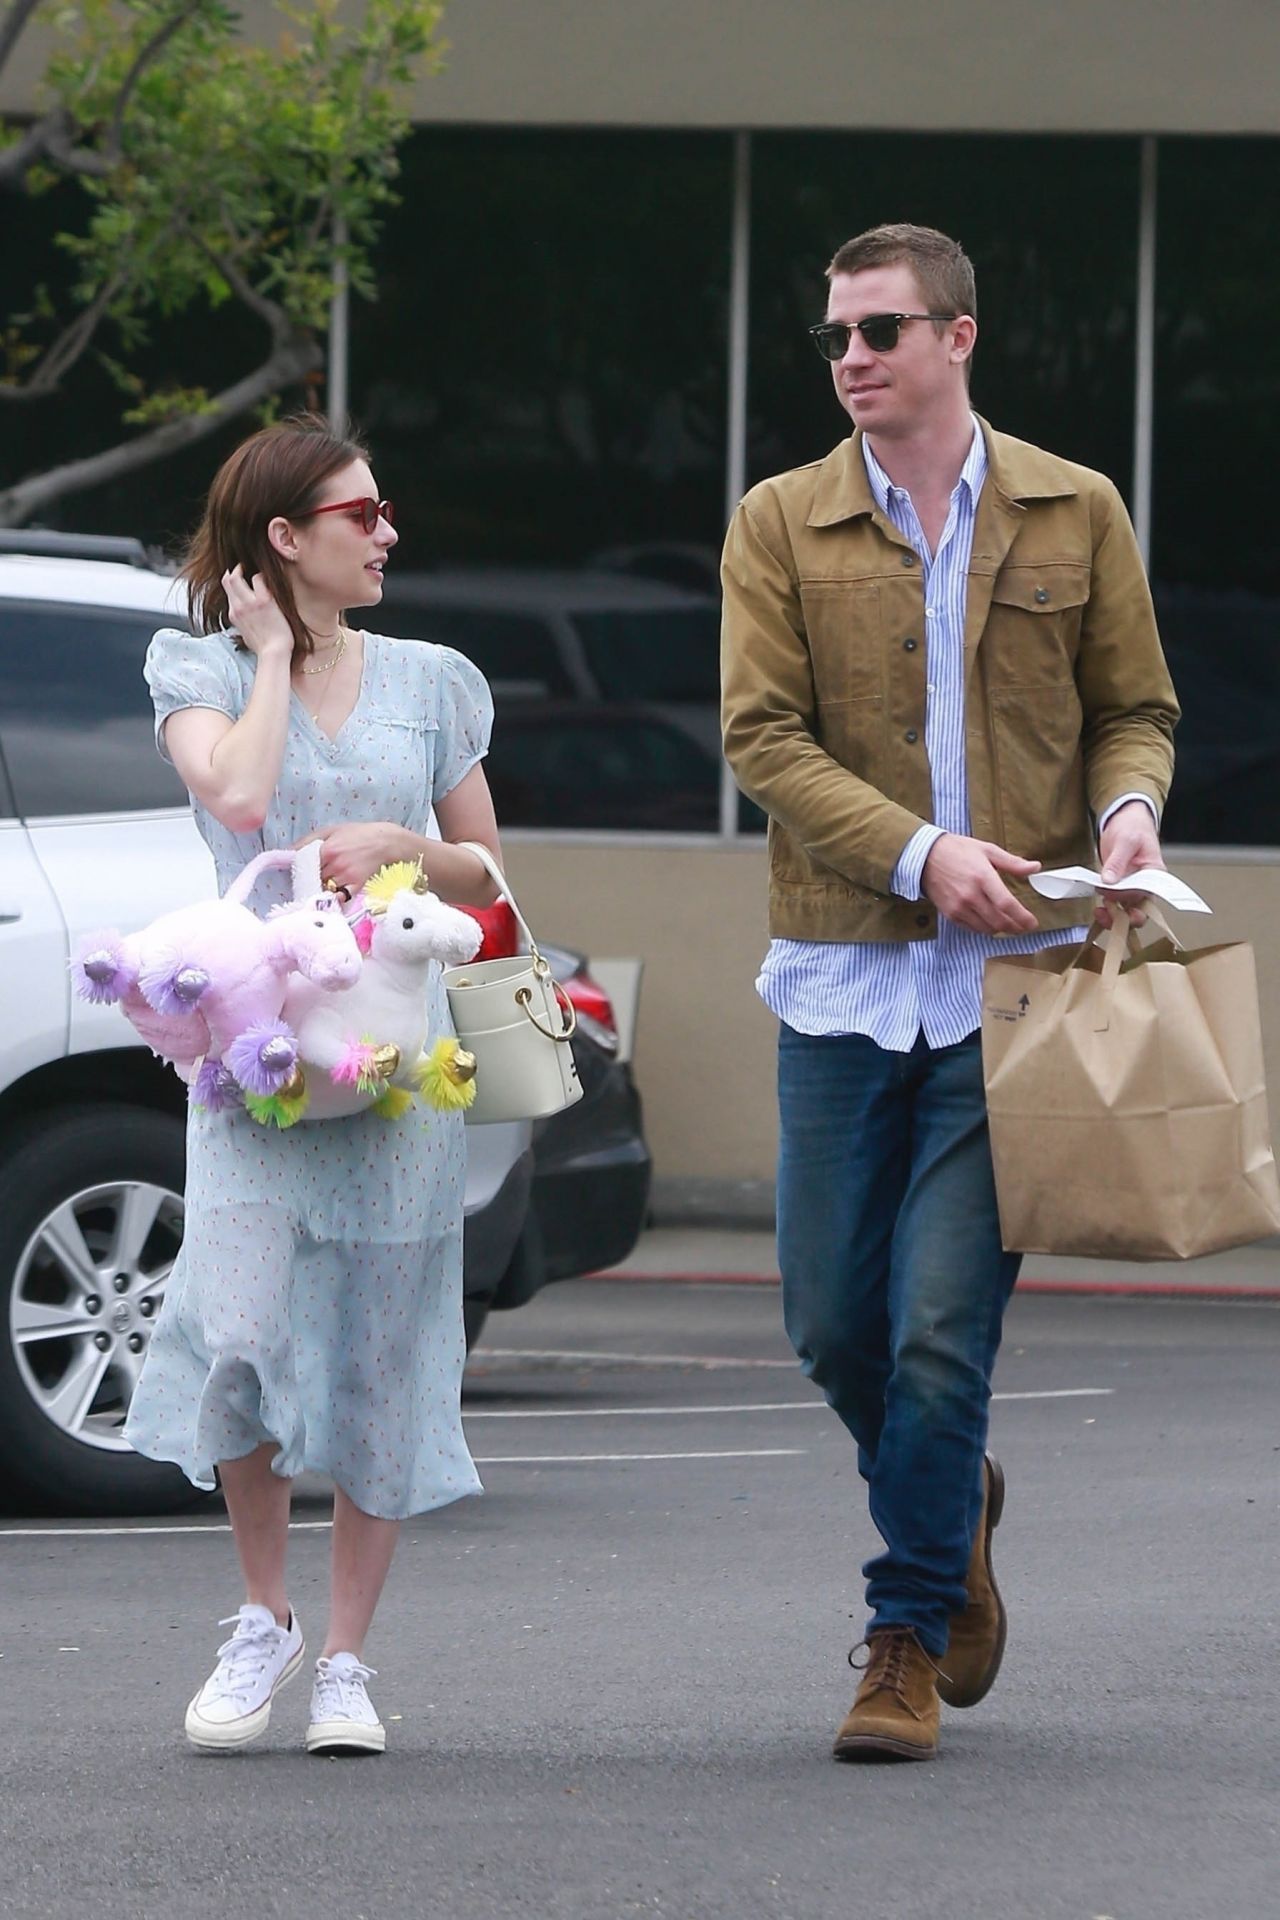 emma-roberts-shopping-on-easter-in-los-angeles-04-21-2019-7.jpg